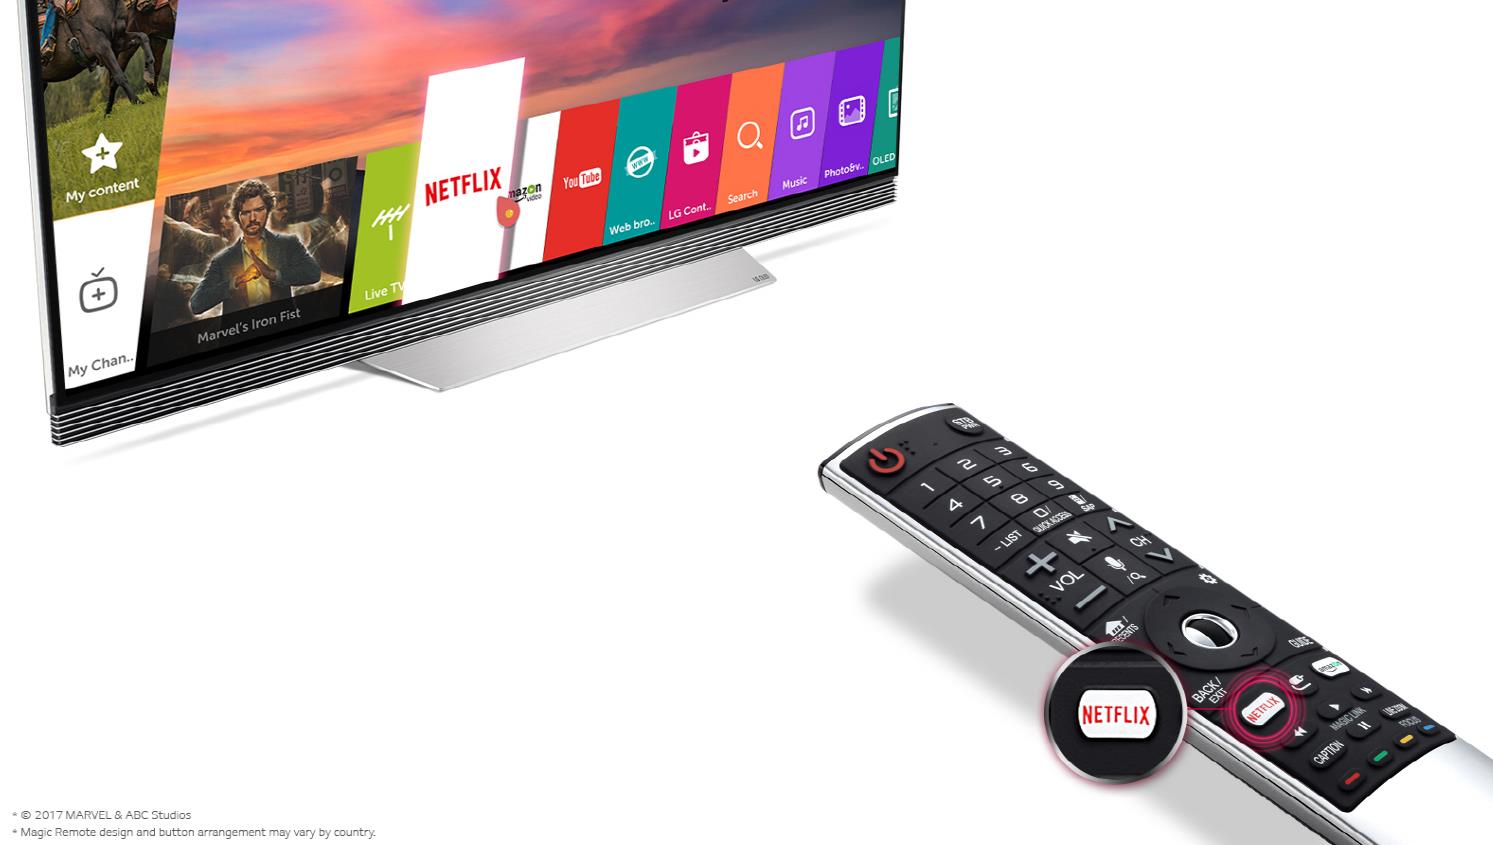 Free 3 months of Netflix with purchase of LG 4K UHD TV 6